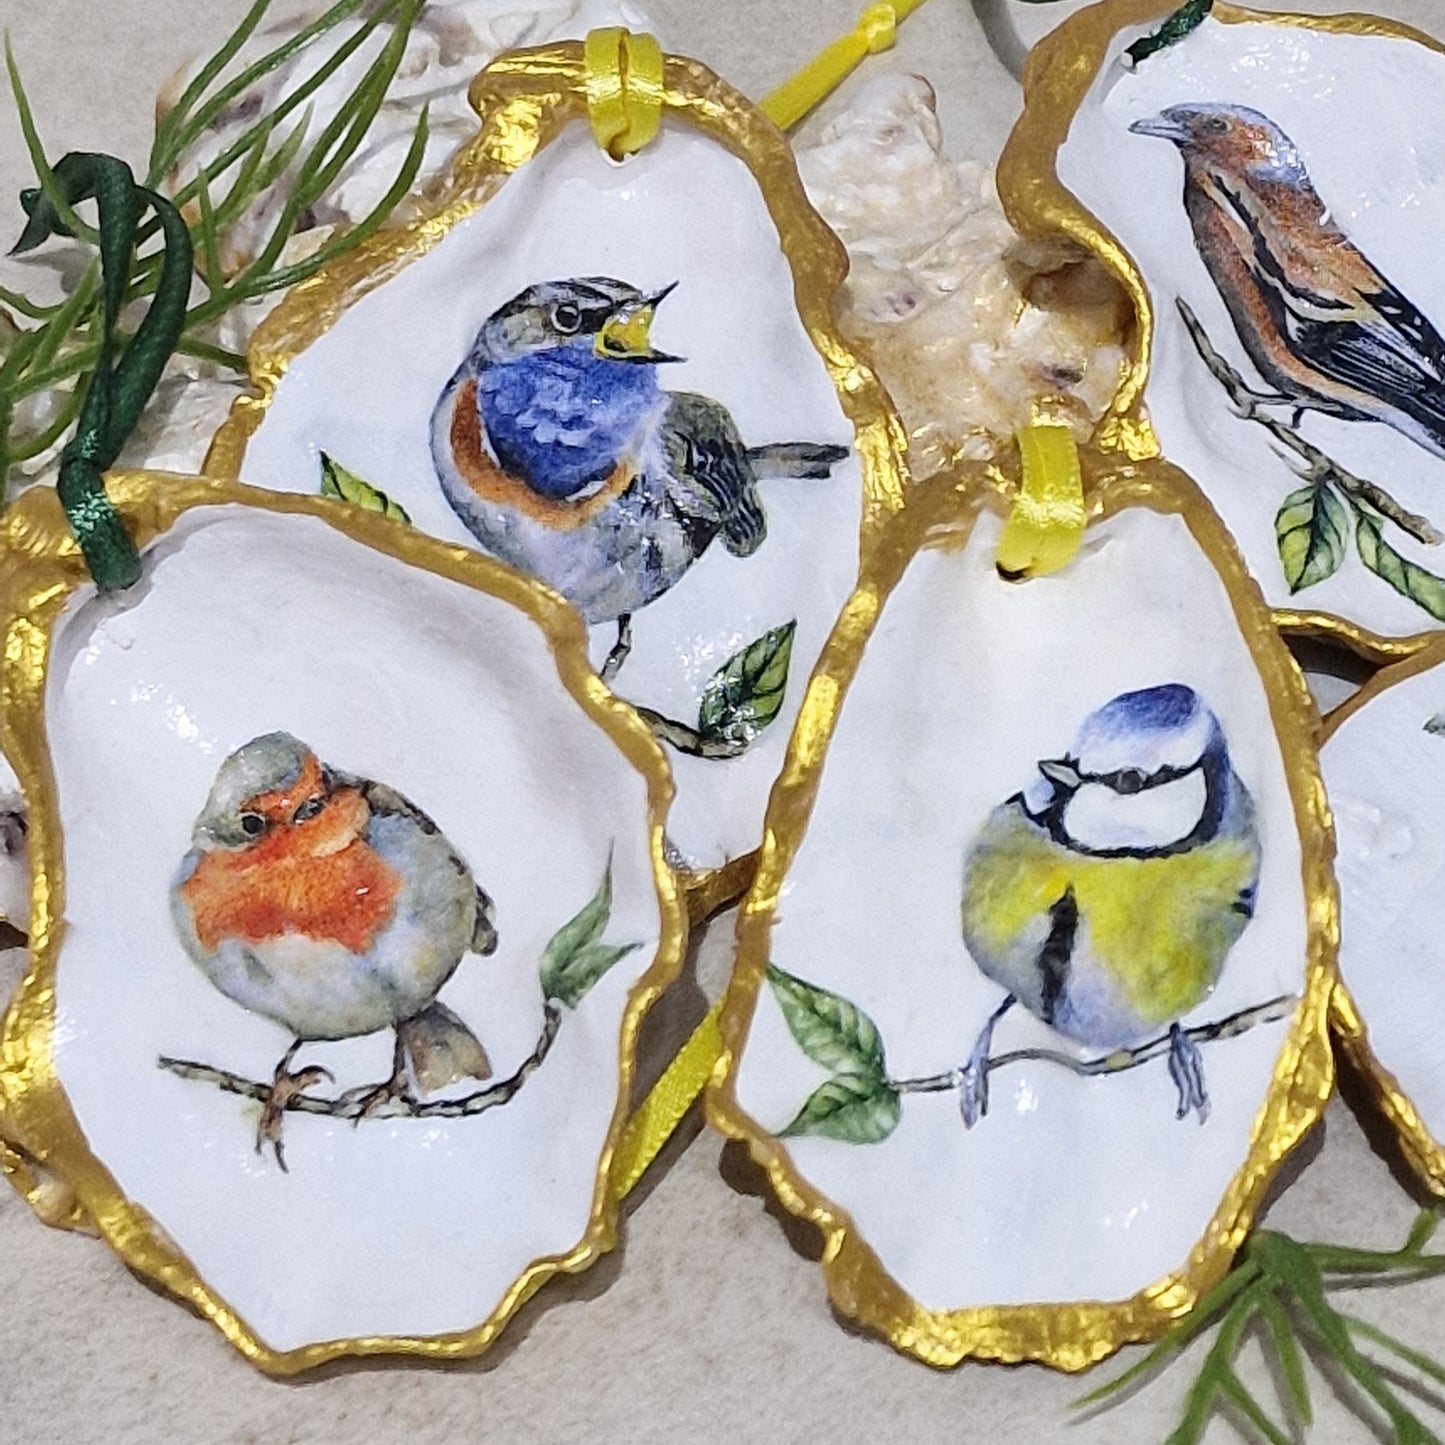 Garden Birds Oyster Shell Hanging Ornaments Decorations Gift Easter Tree - Set of 6